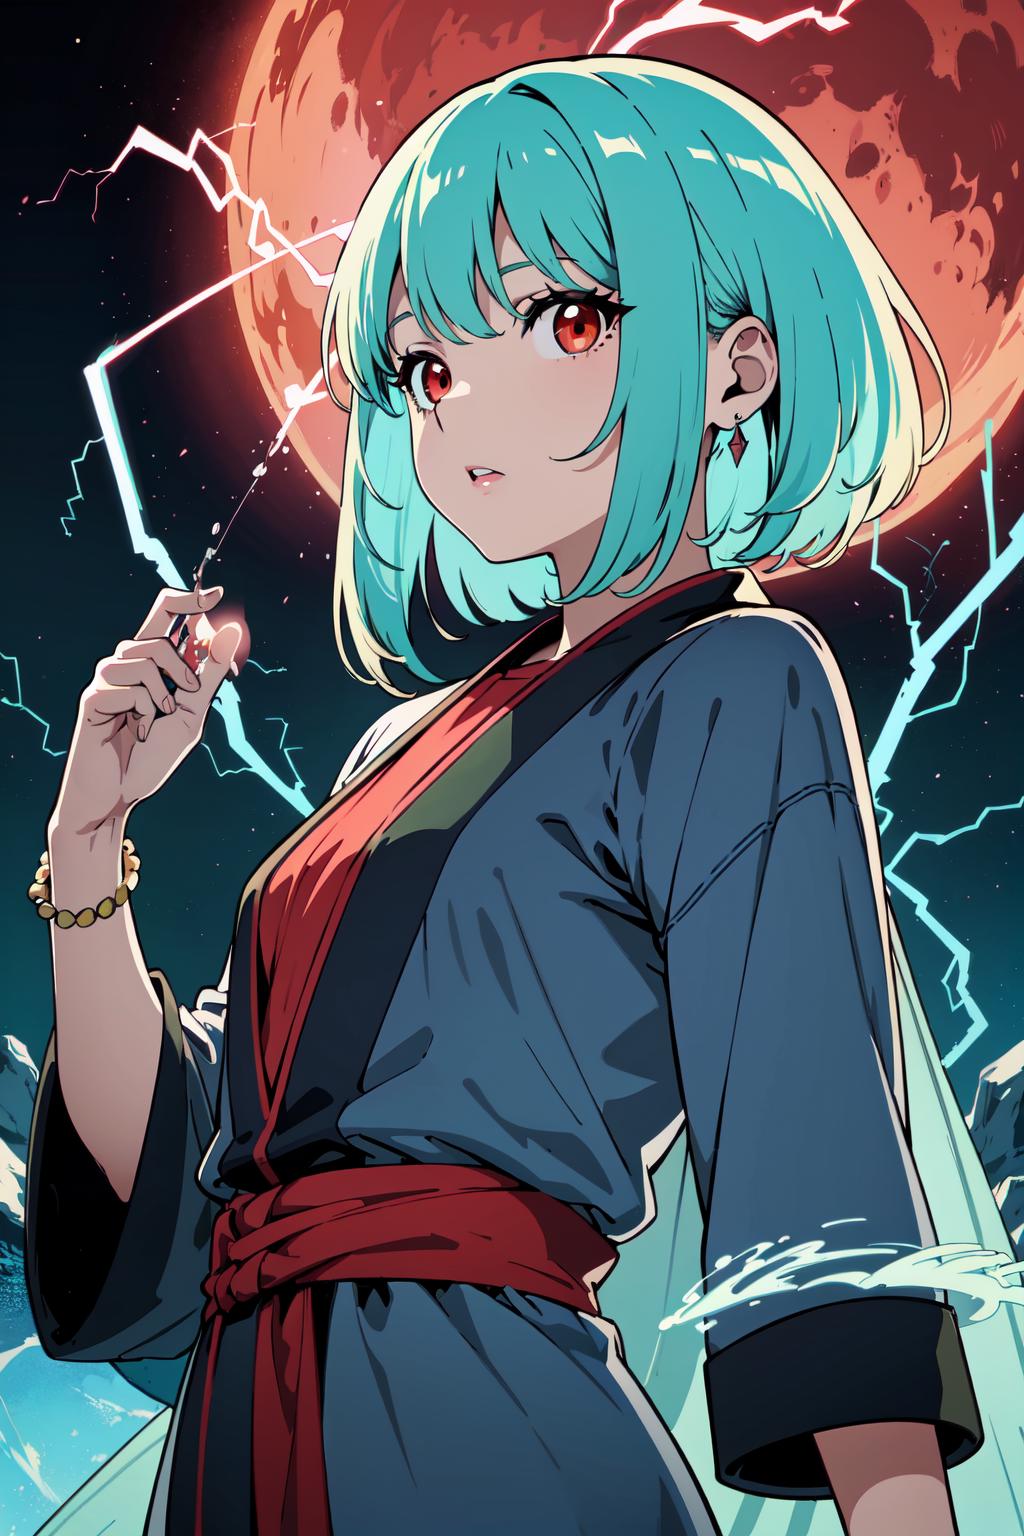 A cartoon anime character with a red ribbon and green hair stands in front of a moon and stars.